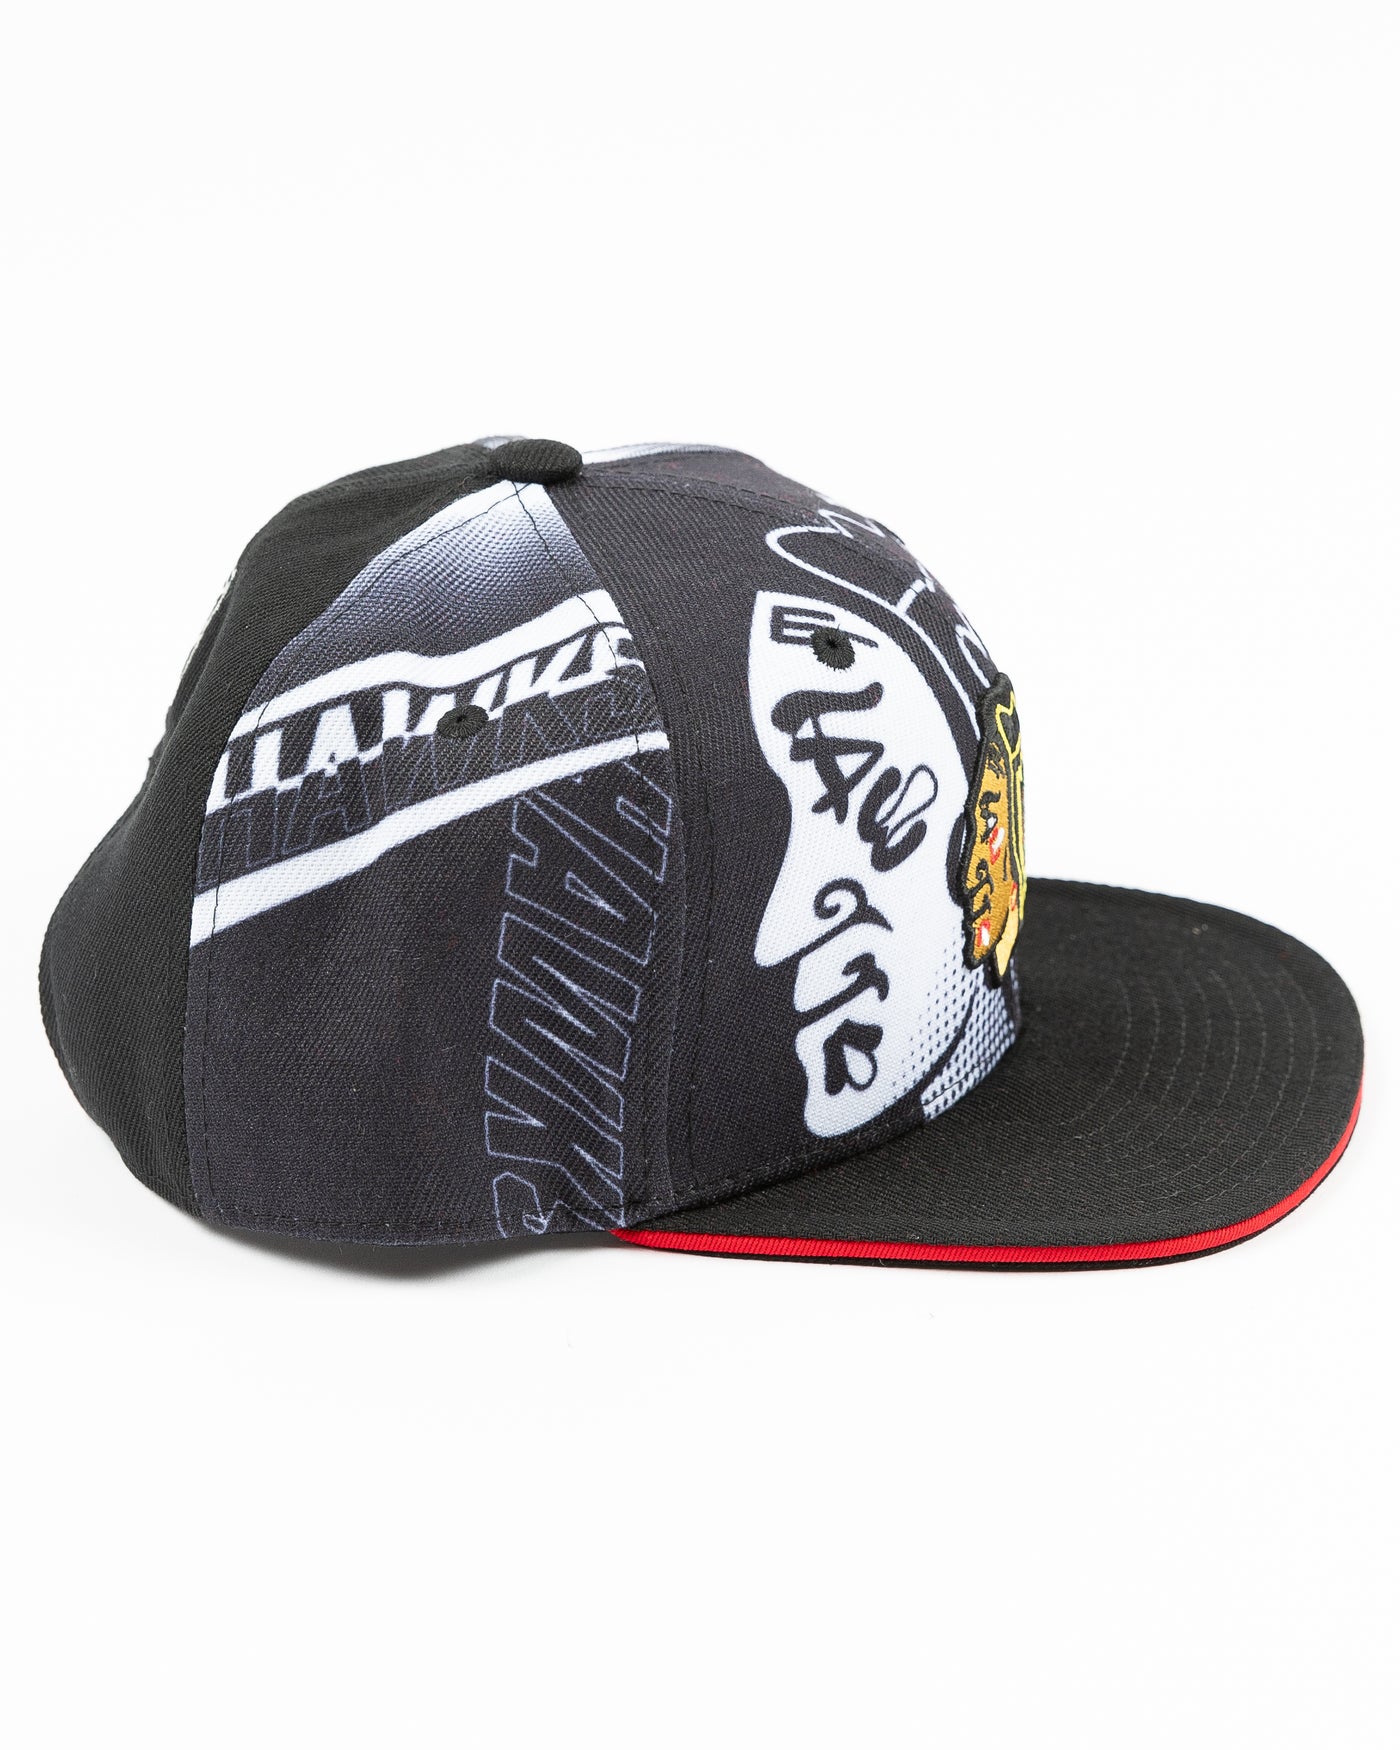 black and white all over print youth snapback cap with Chicago Blackhawks primary logo embroidered on front - right side lay flat